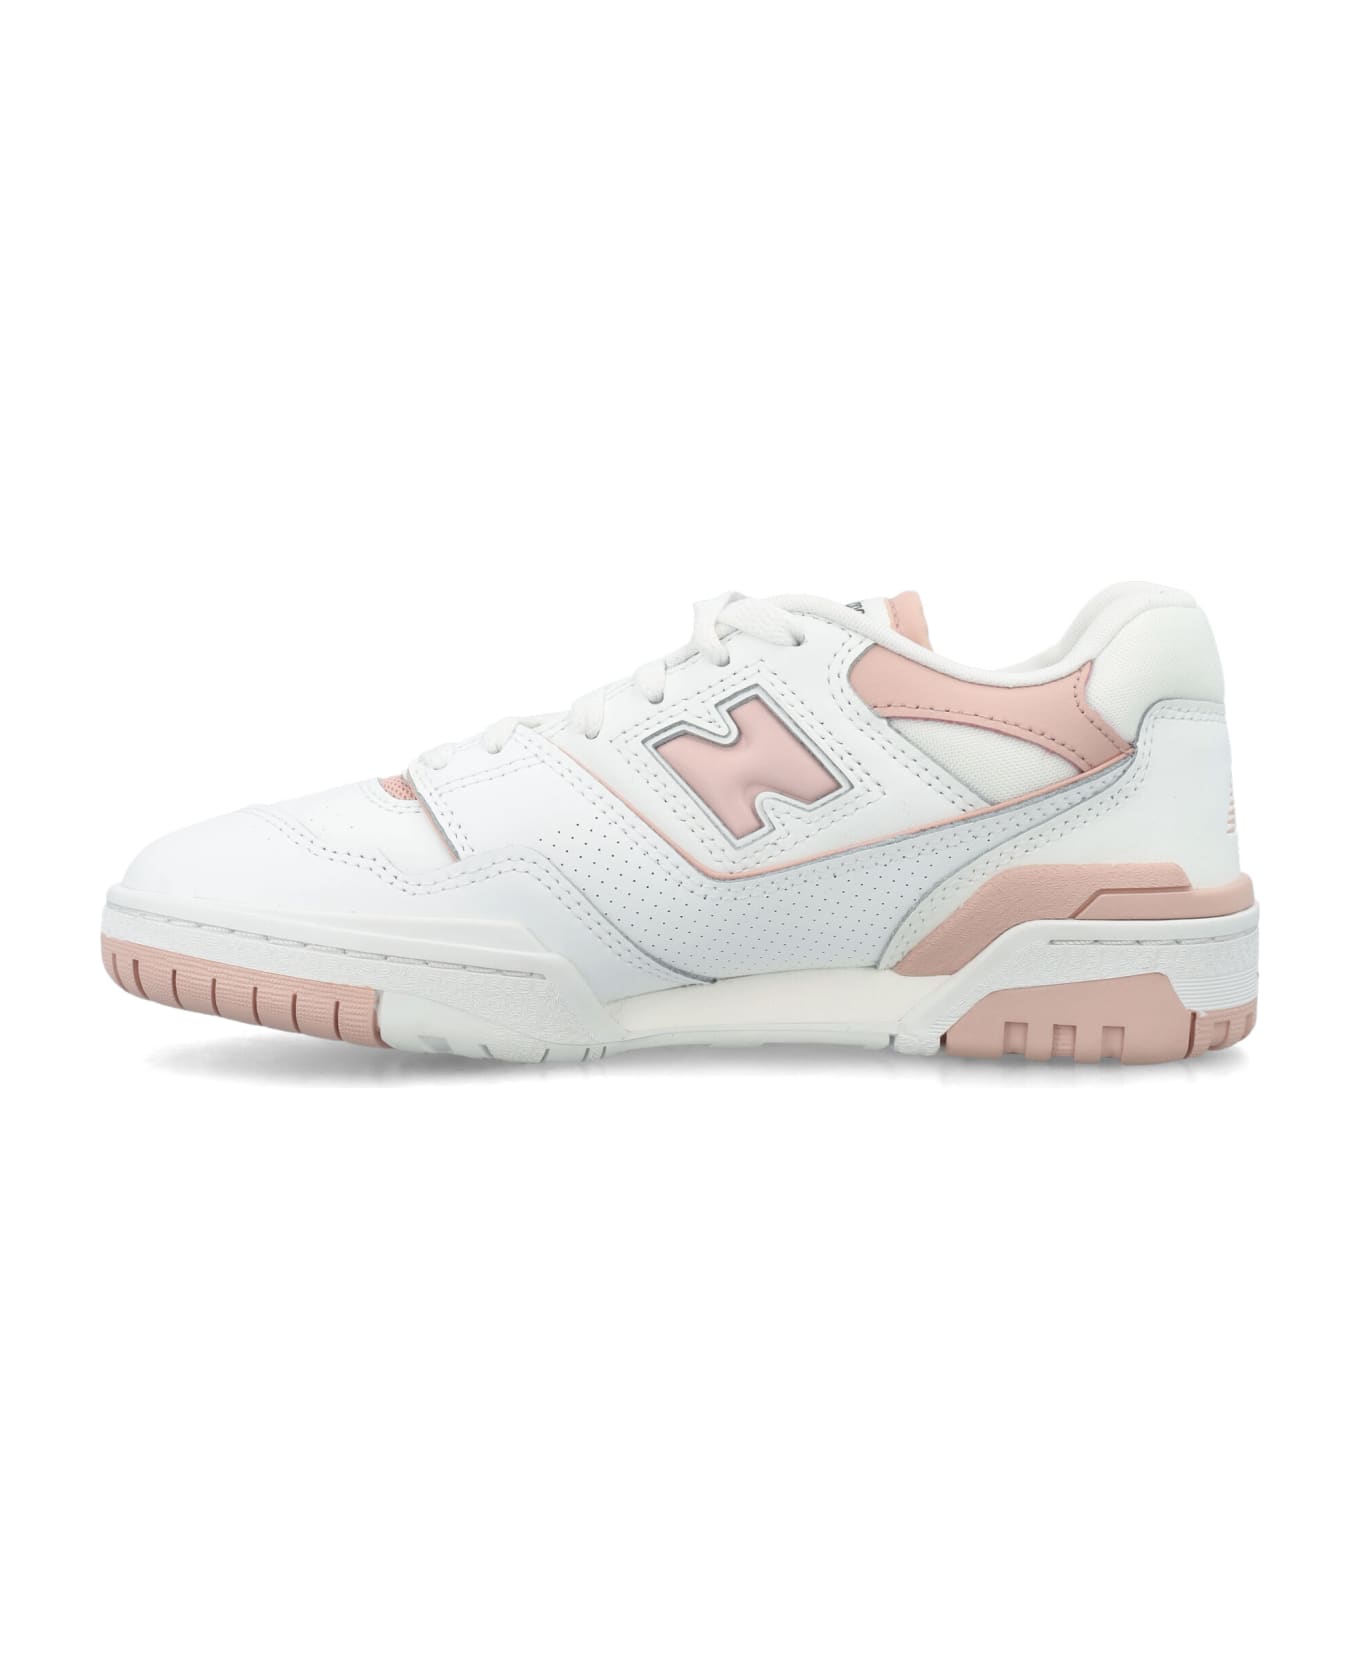 New Balance 550 Woman's Sneakers - WHITE PINK スニーカー